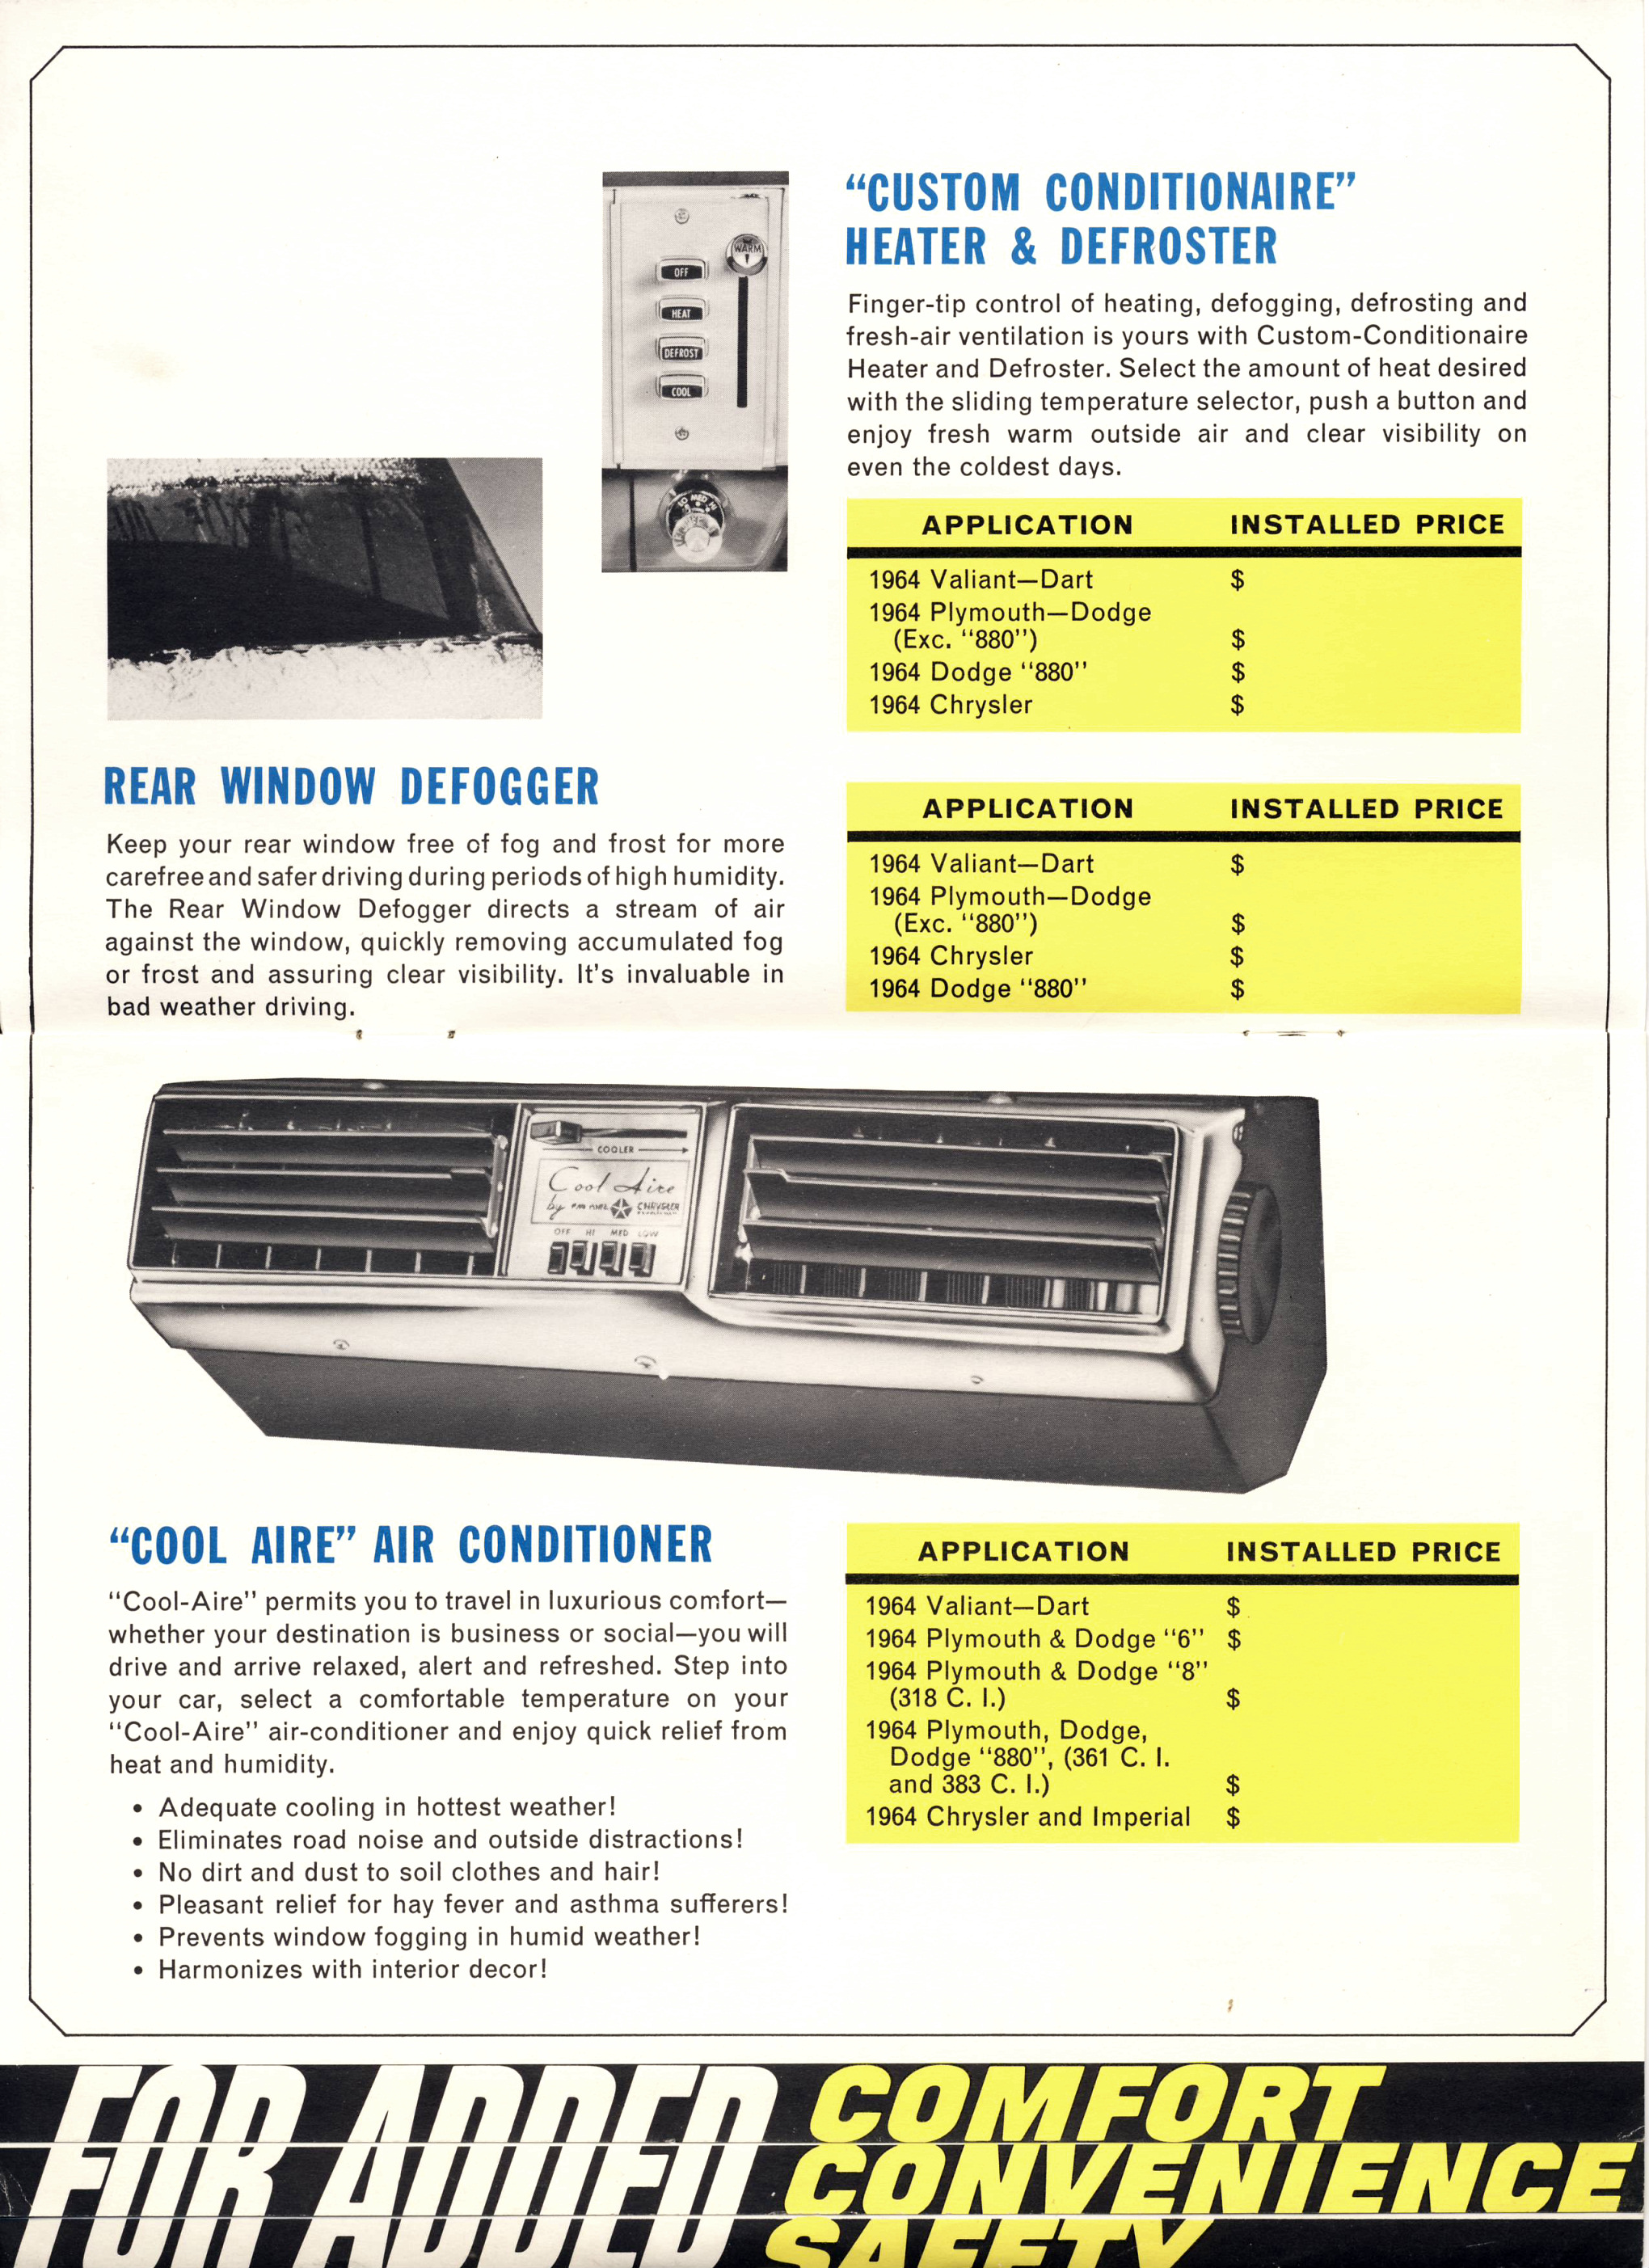 1964_Chrysler_Accessories_Booklet-02-03